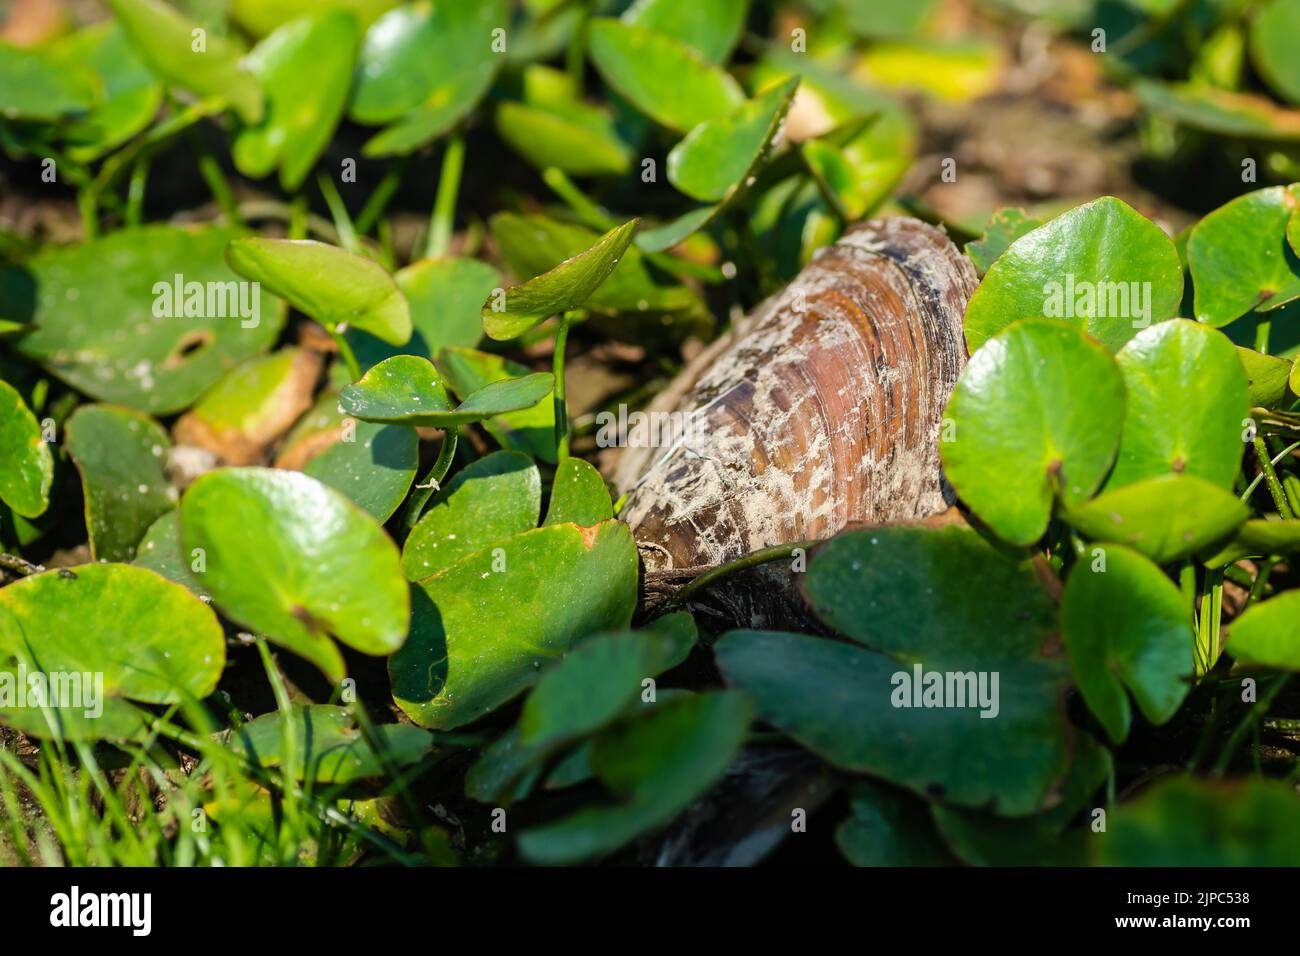 River shell among water lily leaves. River shell among water lily leaves on the dried surface of the lake, close up. Stock Photo